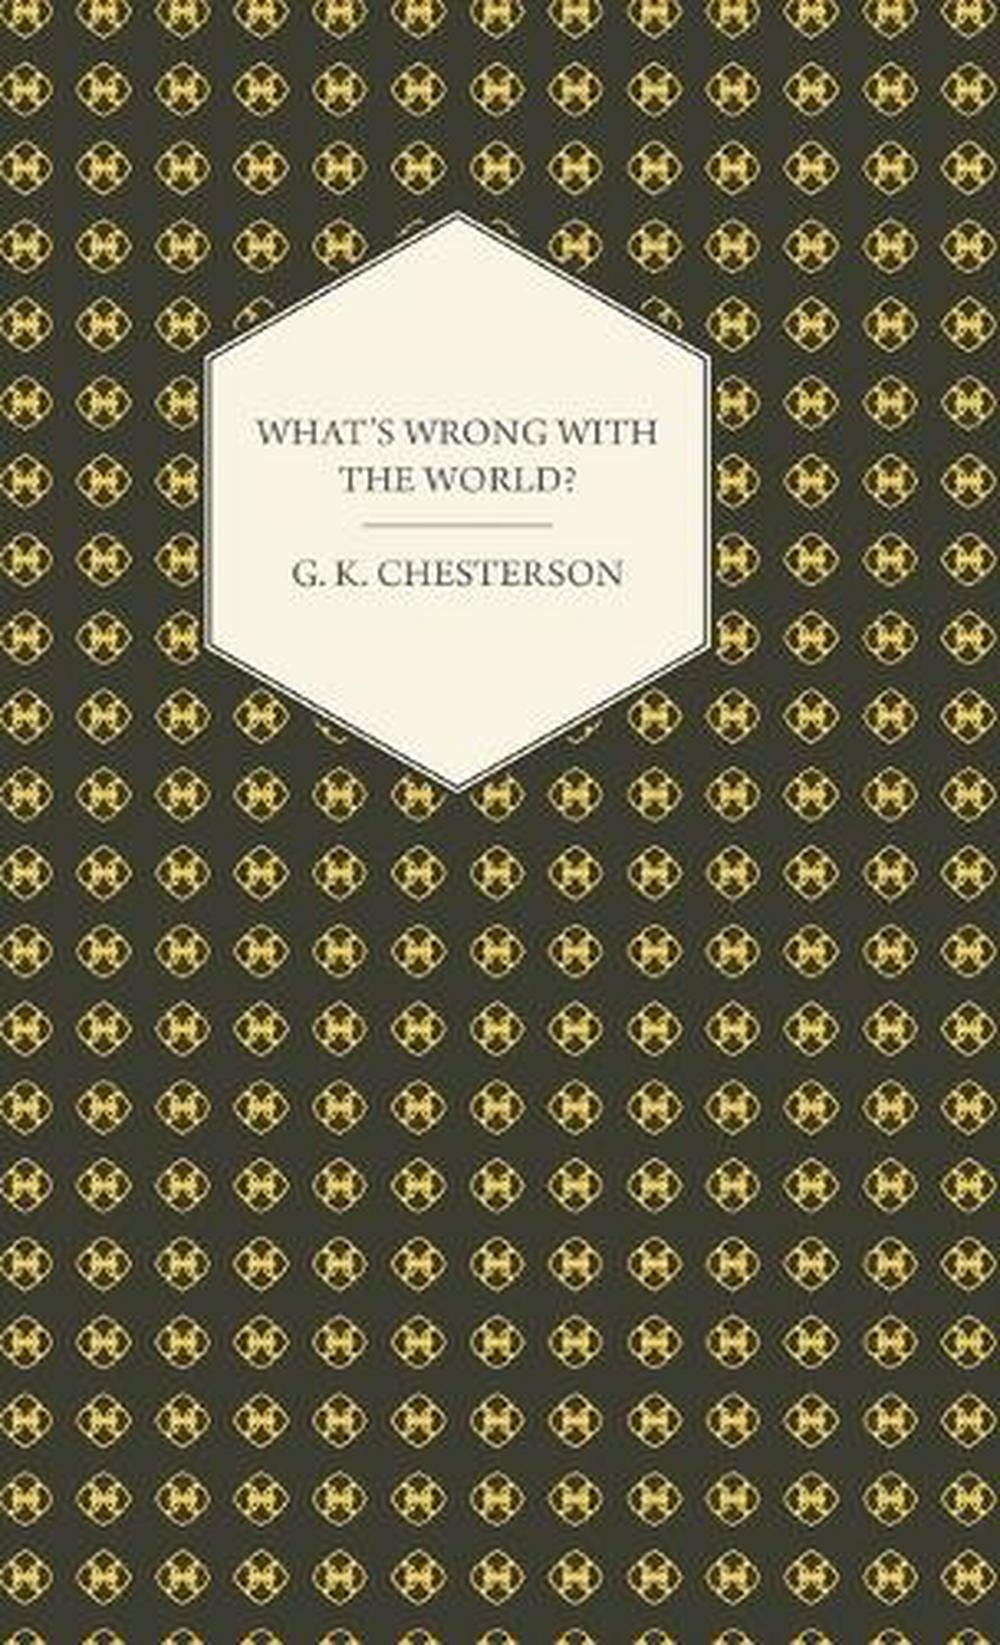 What's Wrong with the World? by G.K. Chesterton (English) Hardcover ...